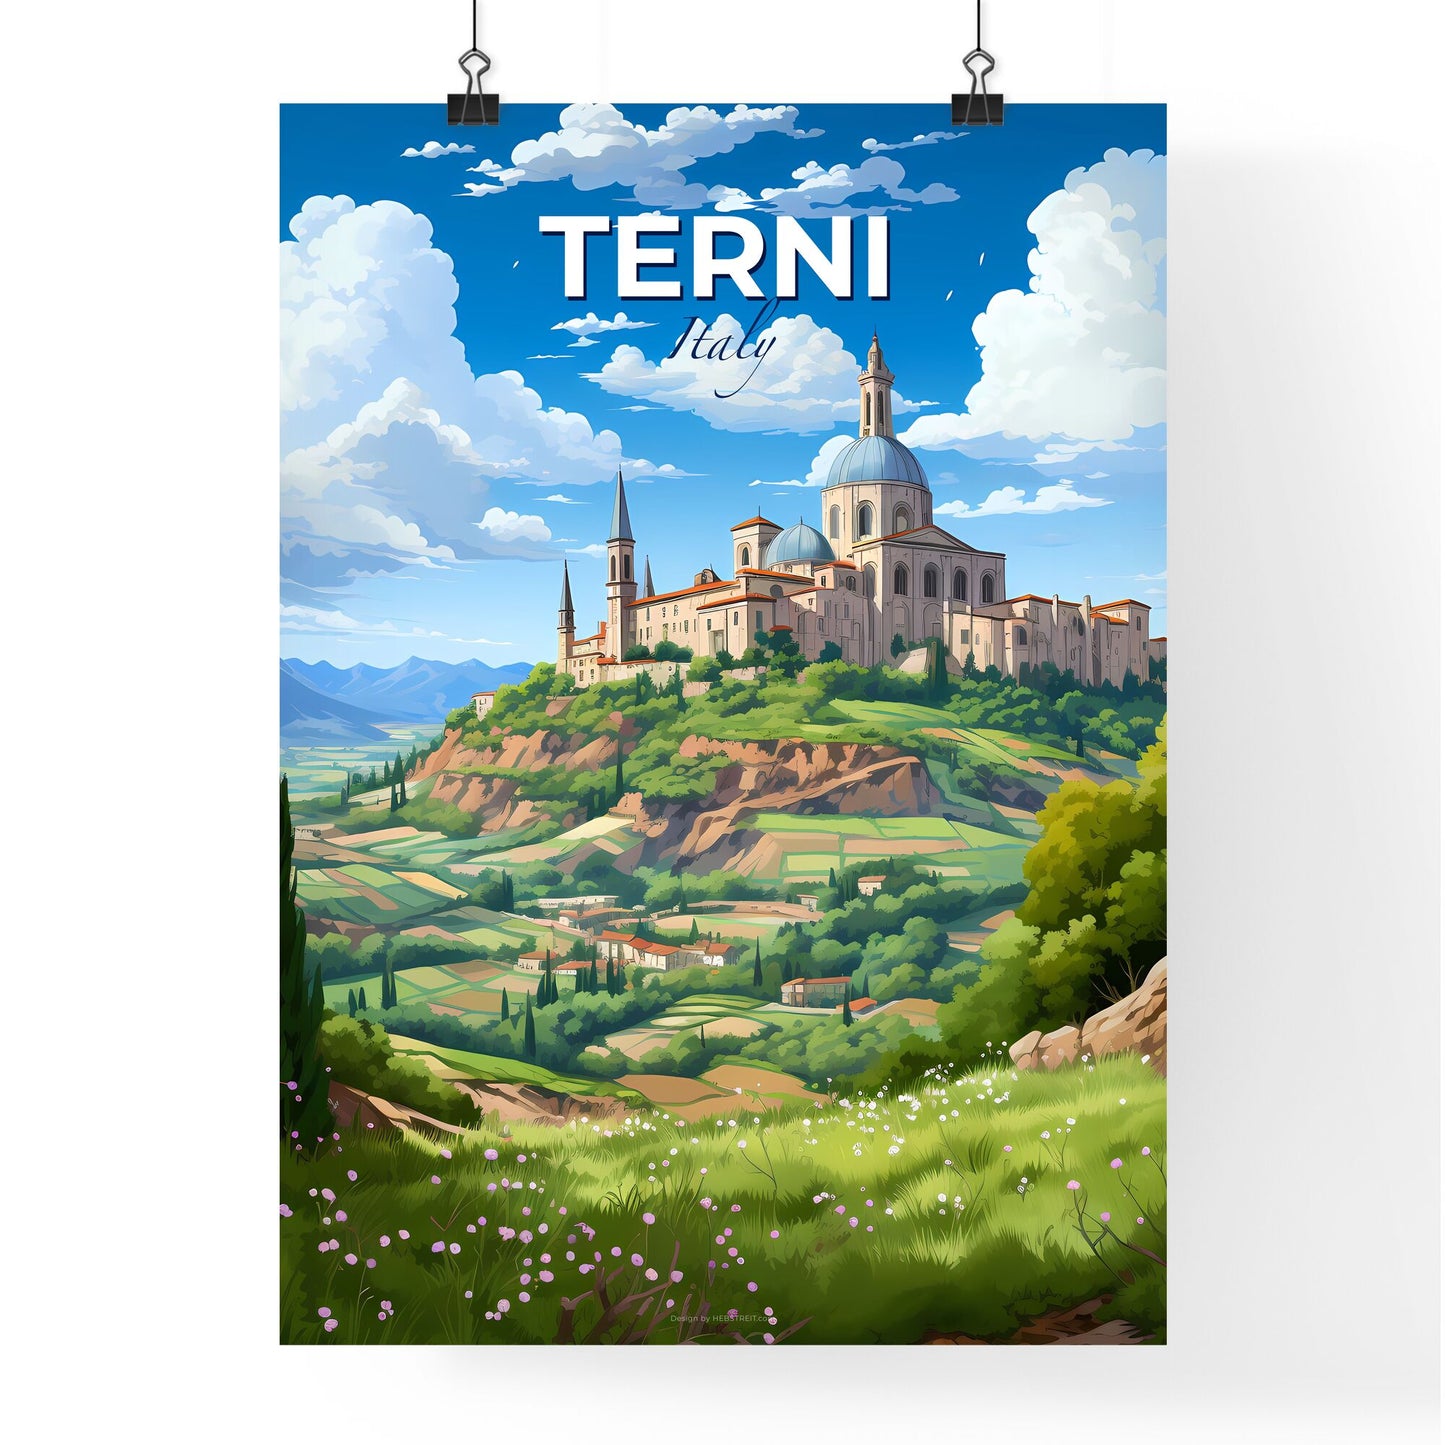 Terni, Italy, A Poster of a castle on a hill Default Title